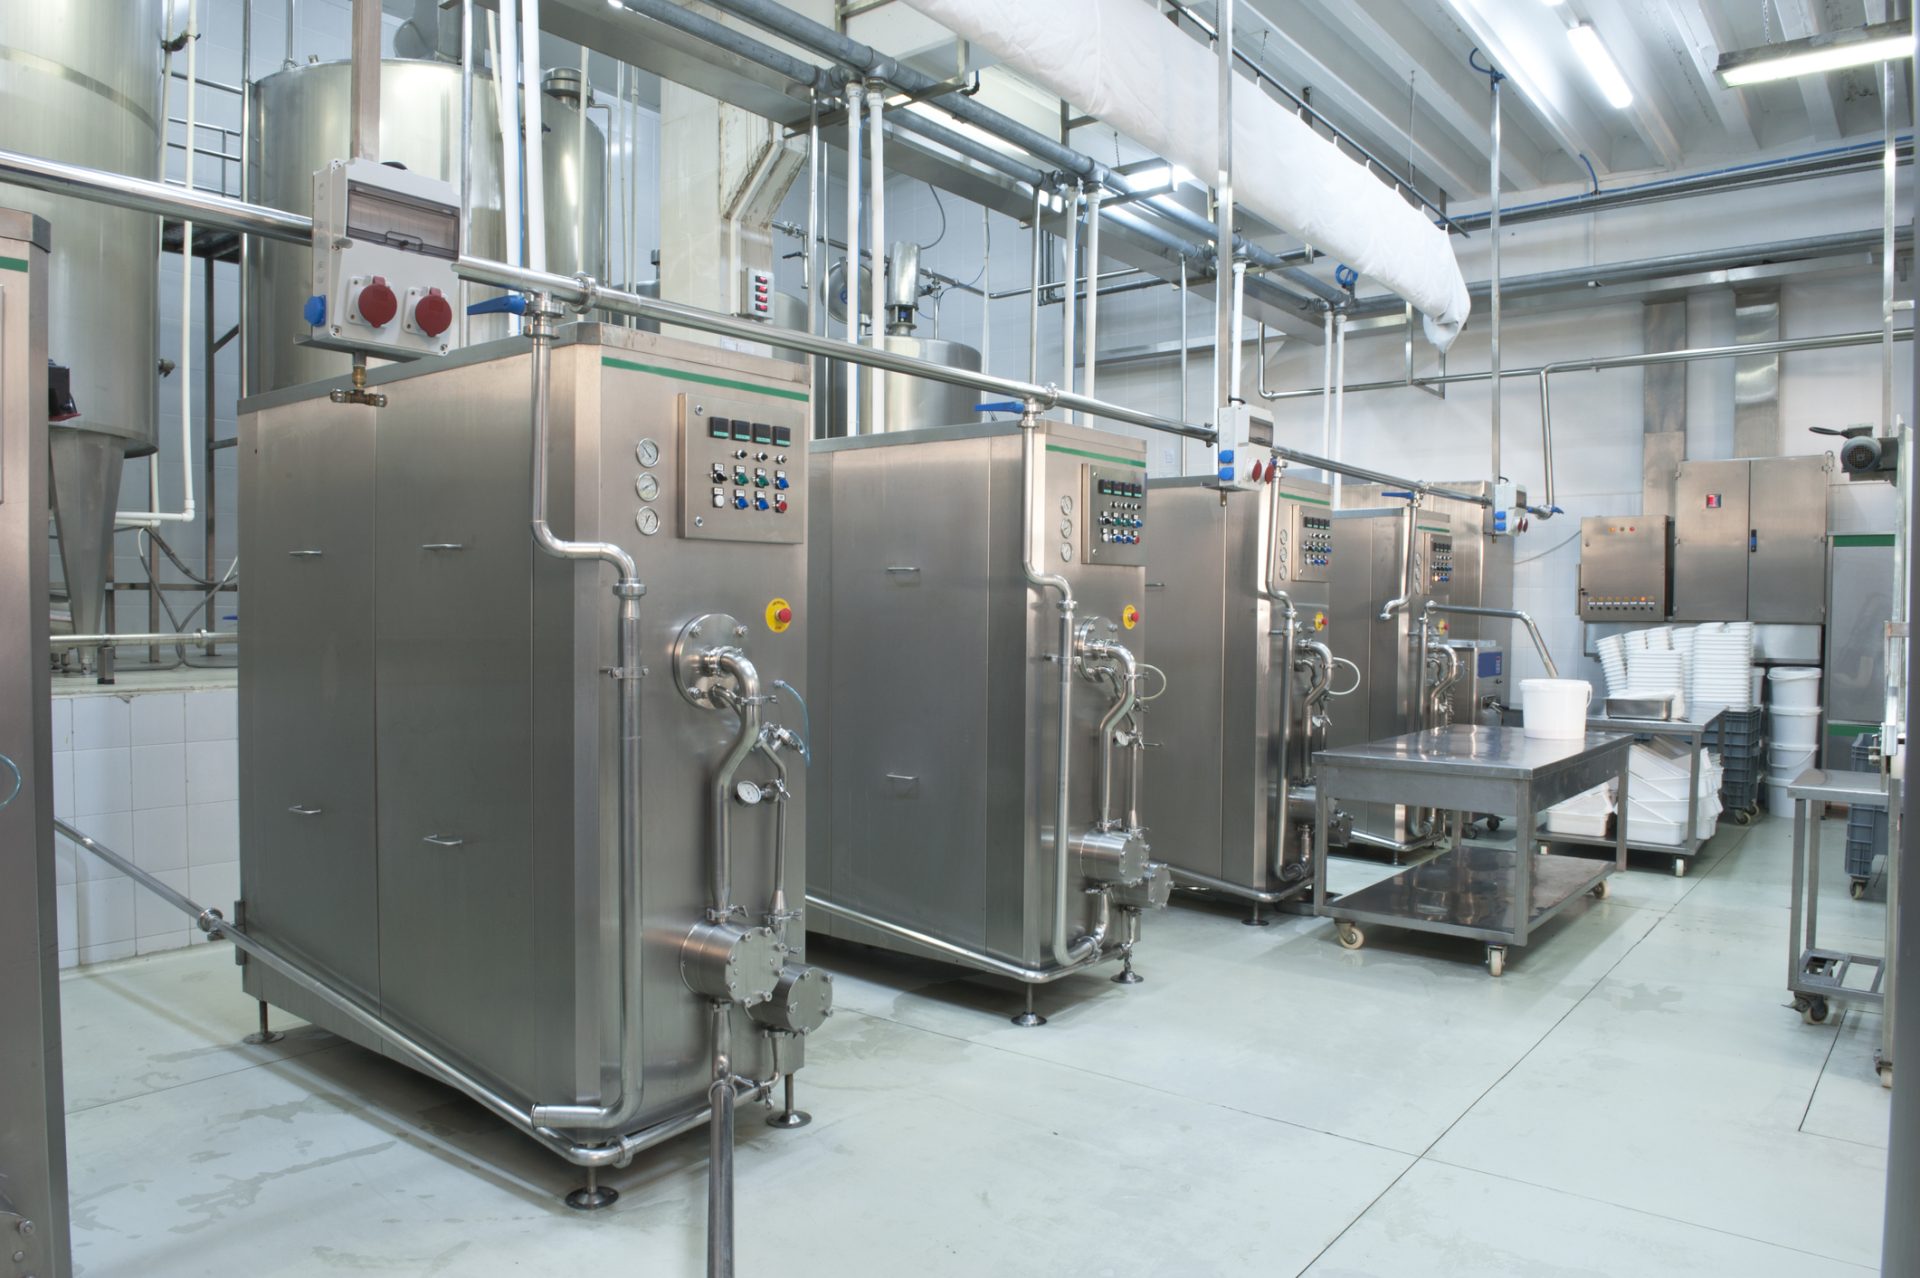 Validation and Verification of Ice cream equipment in a factory.